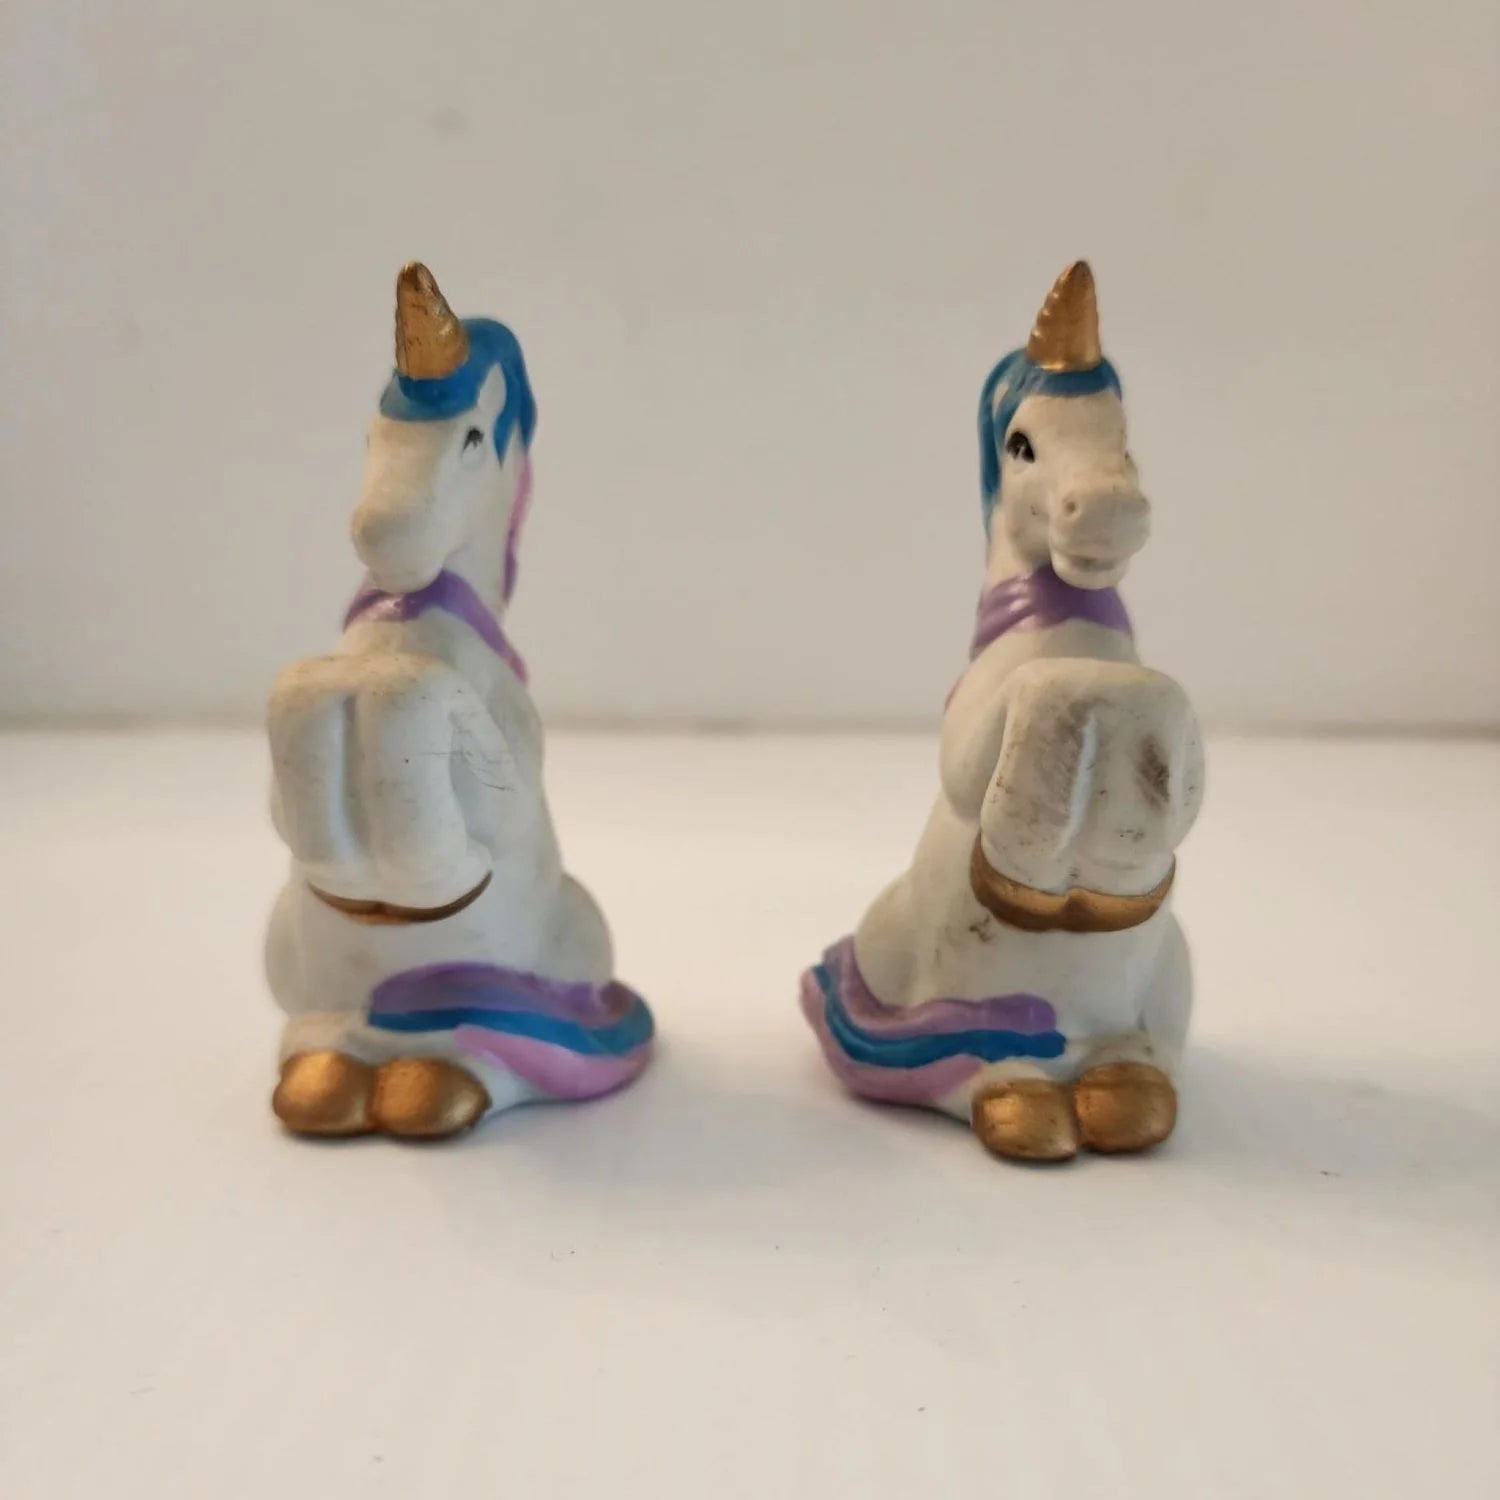 Two ceramic unicorn figurines sitting on a table, one white and one pink, with intricate details and a glossy finish.